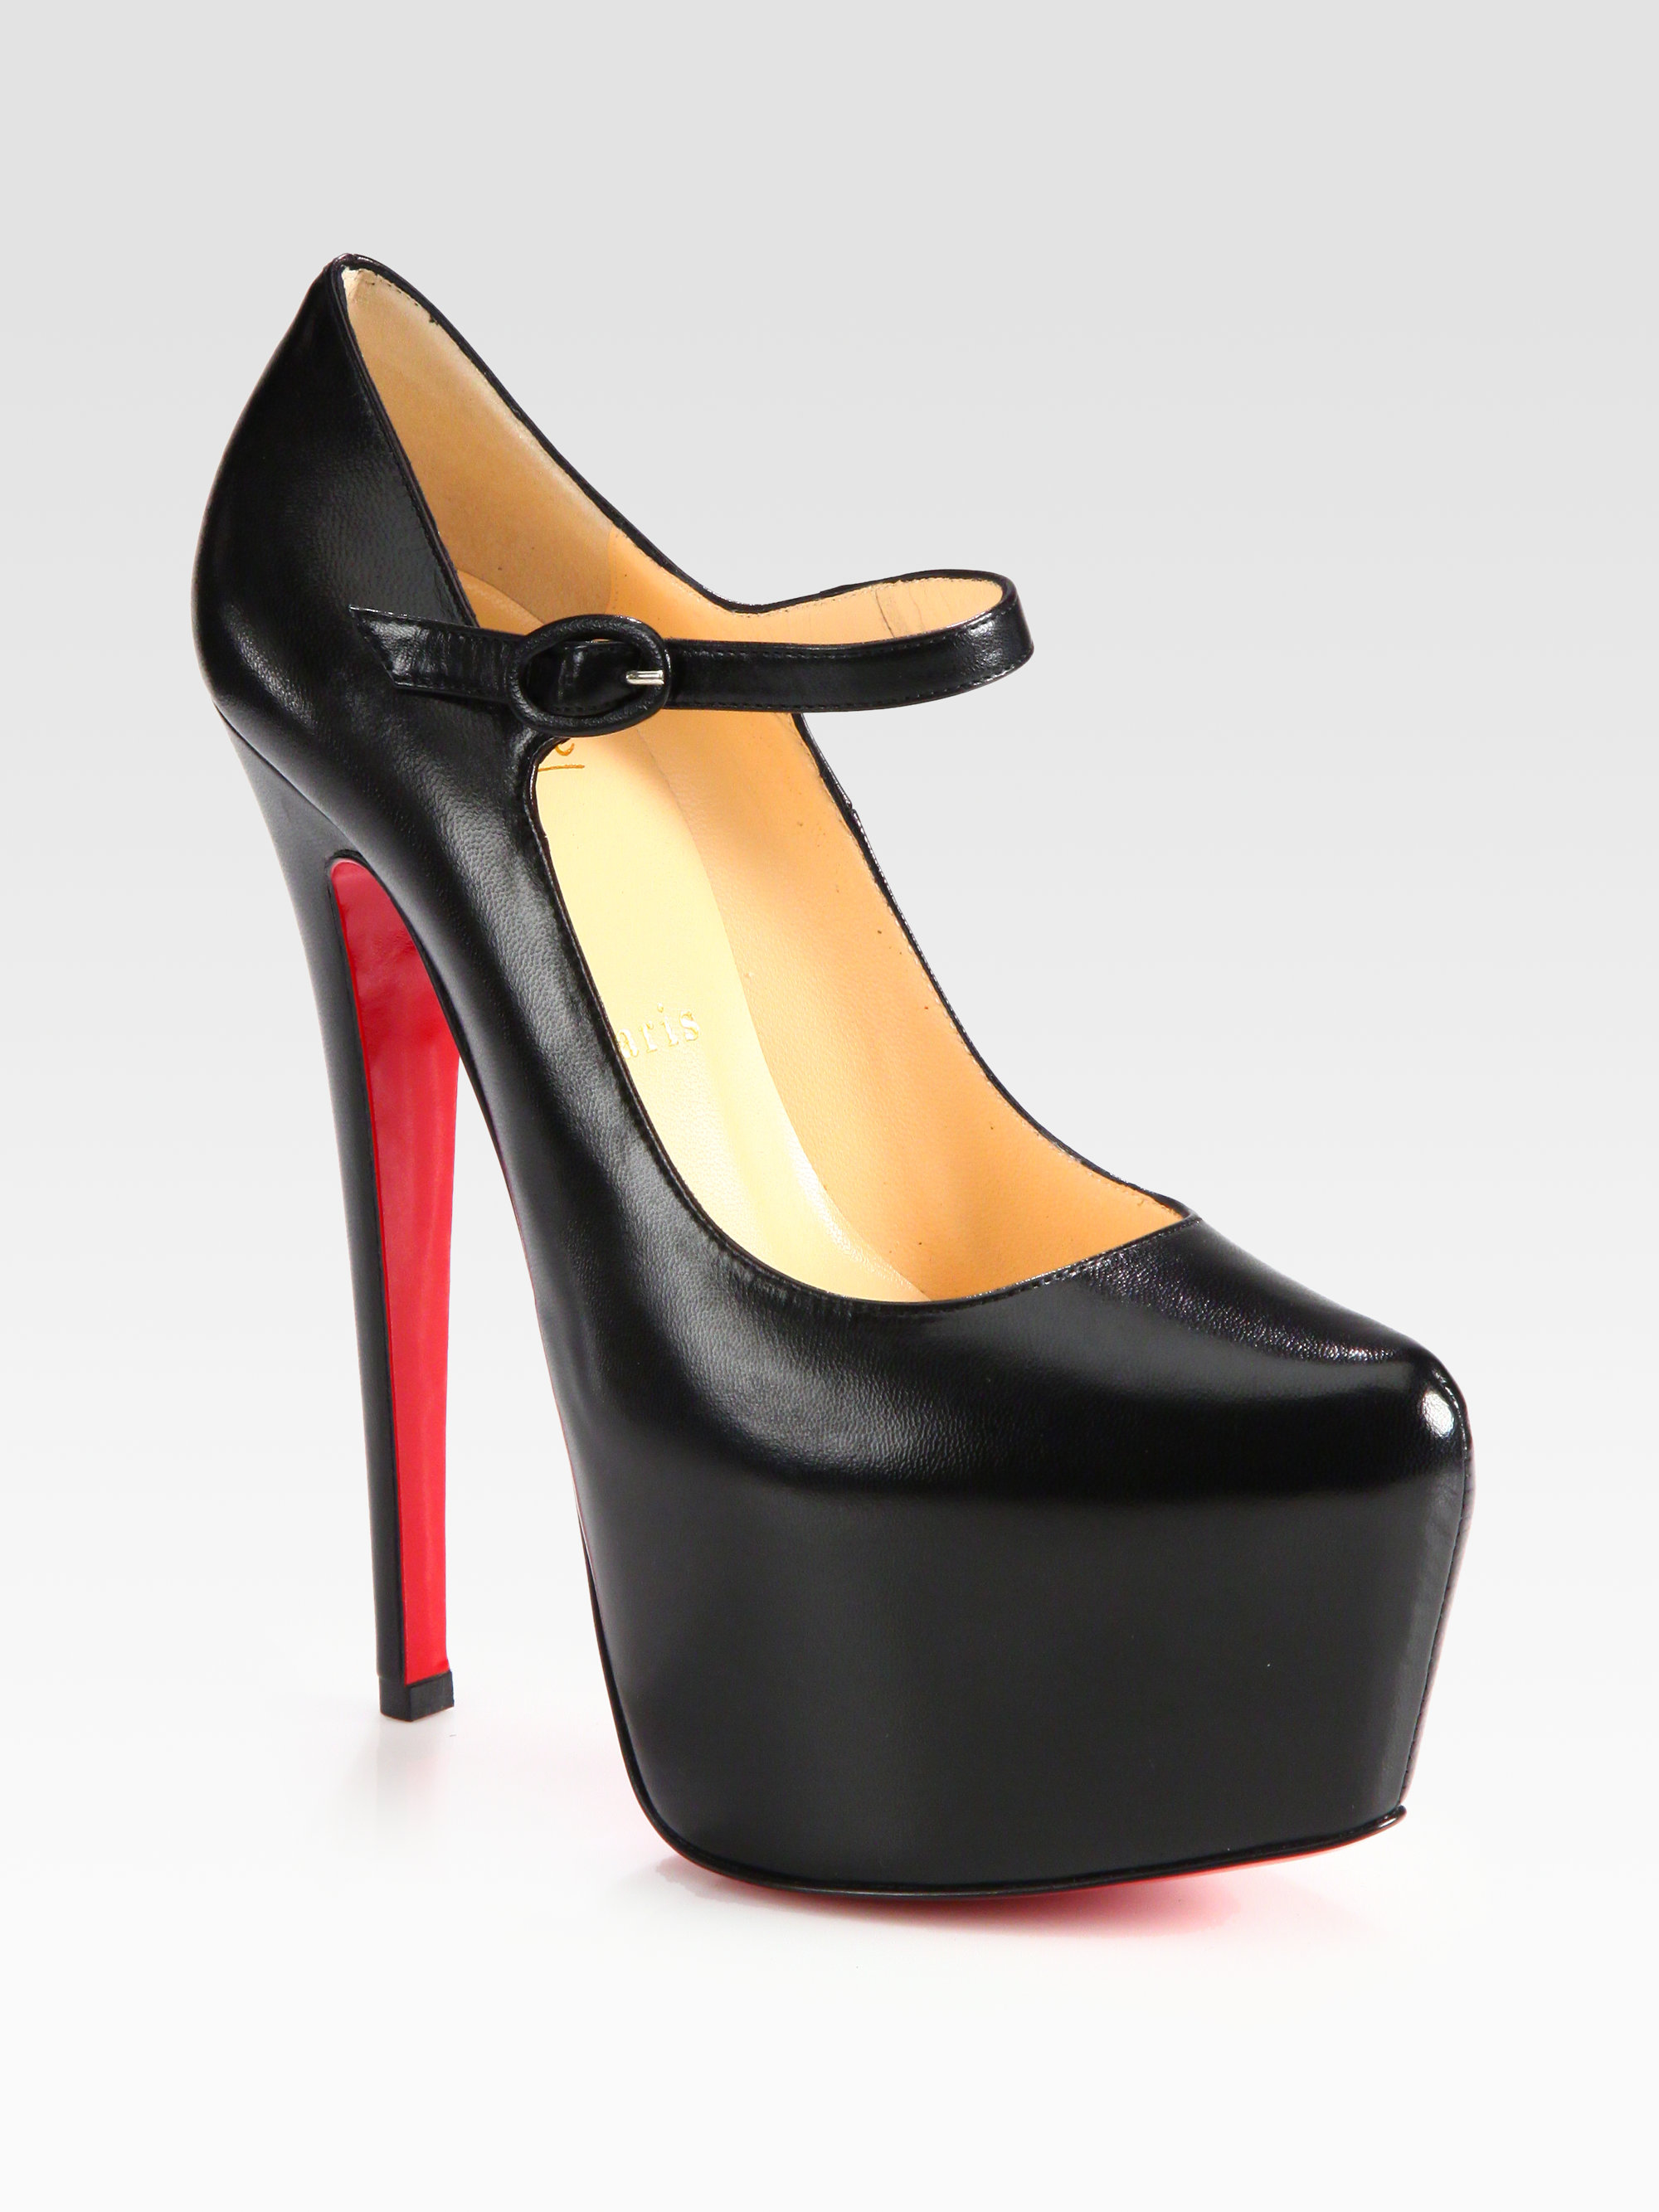 spikes shoes for men - christian louboutin Trois-Strap Mary Jane pumps Black leather ...